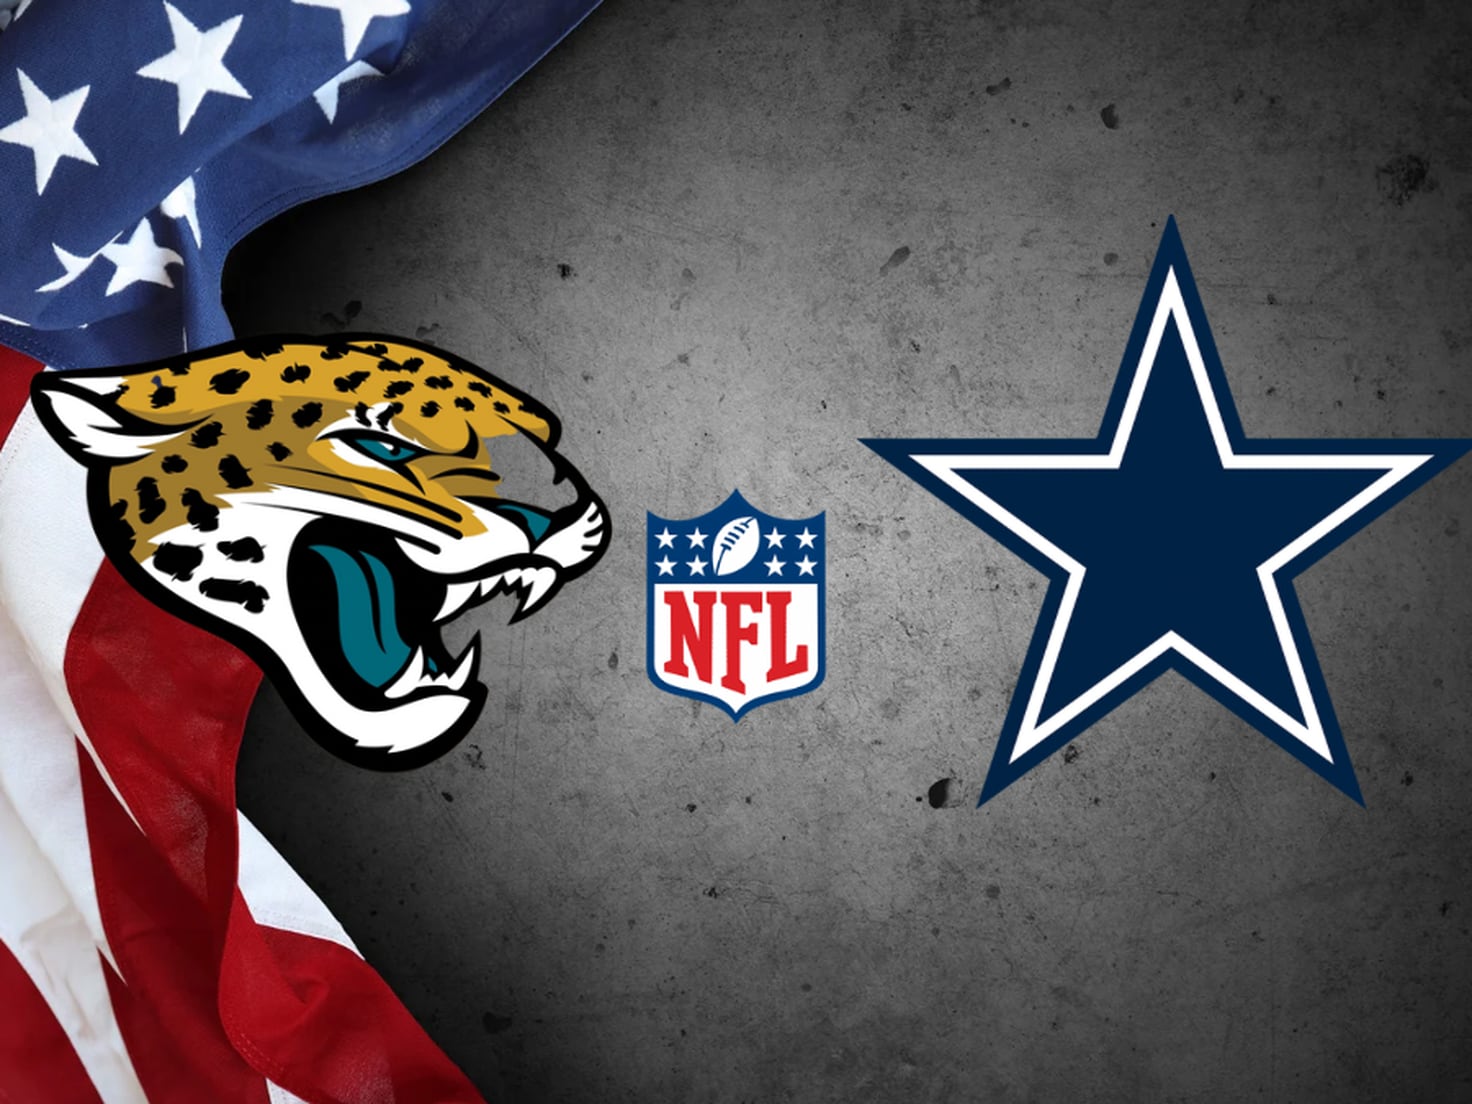 Jacksonville Jaguars vs Dallas Cowboys: times, how to watch on TV